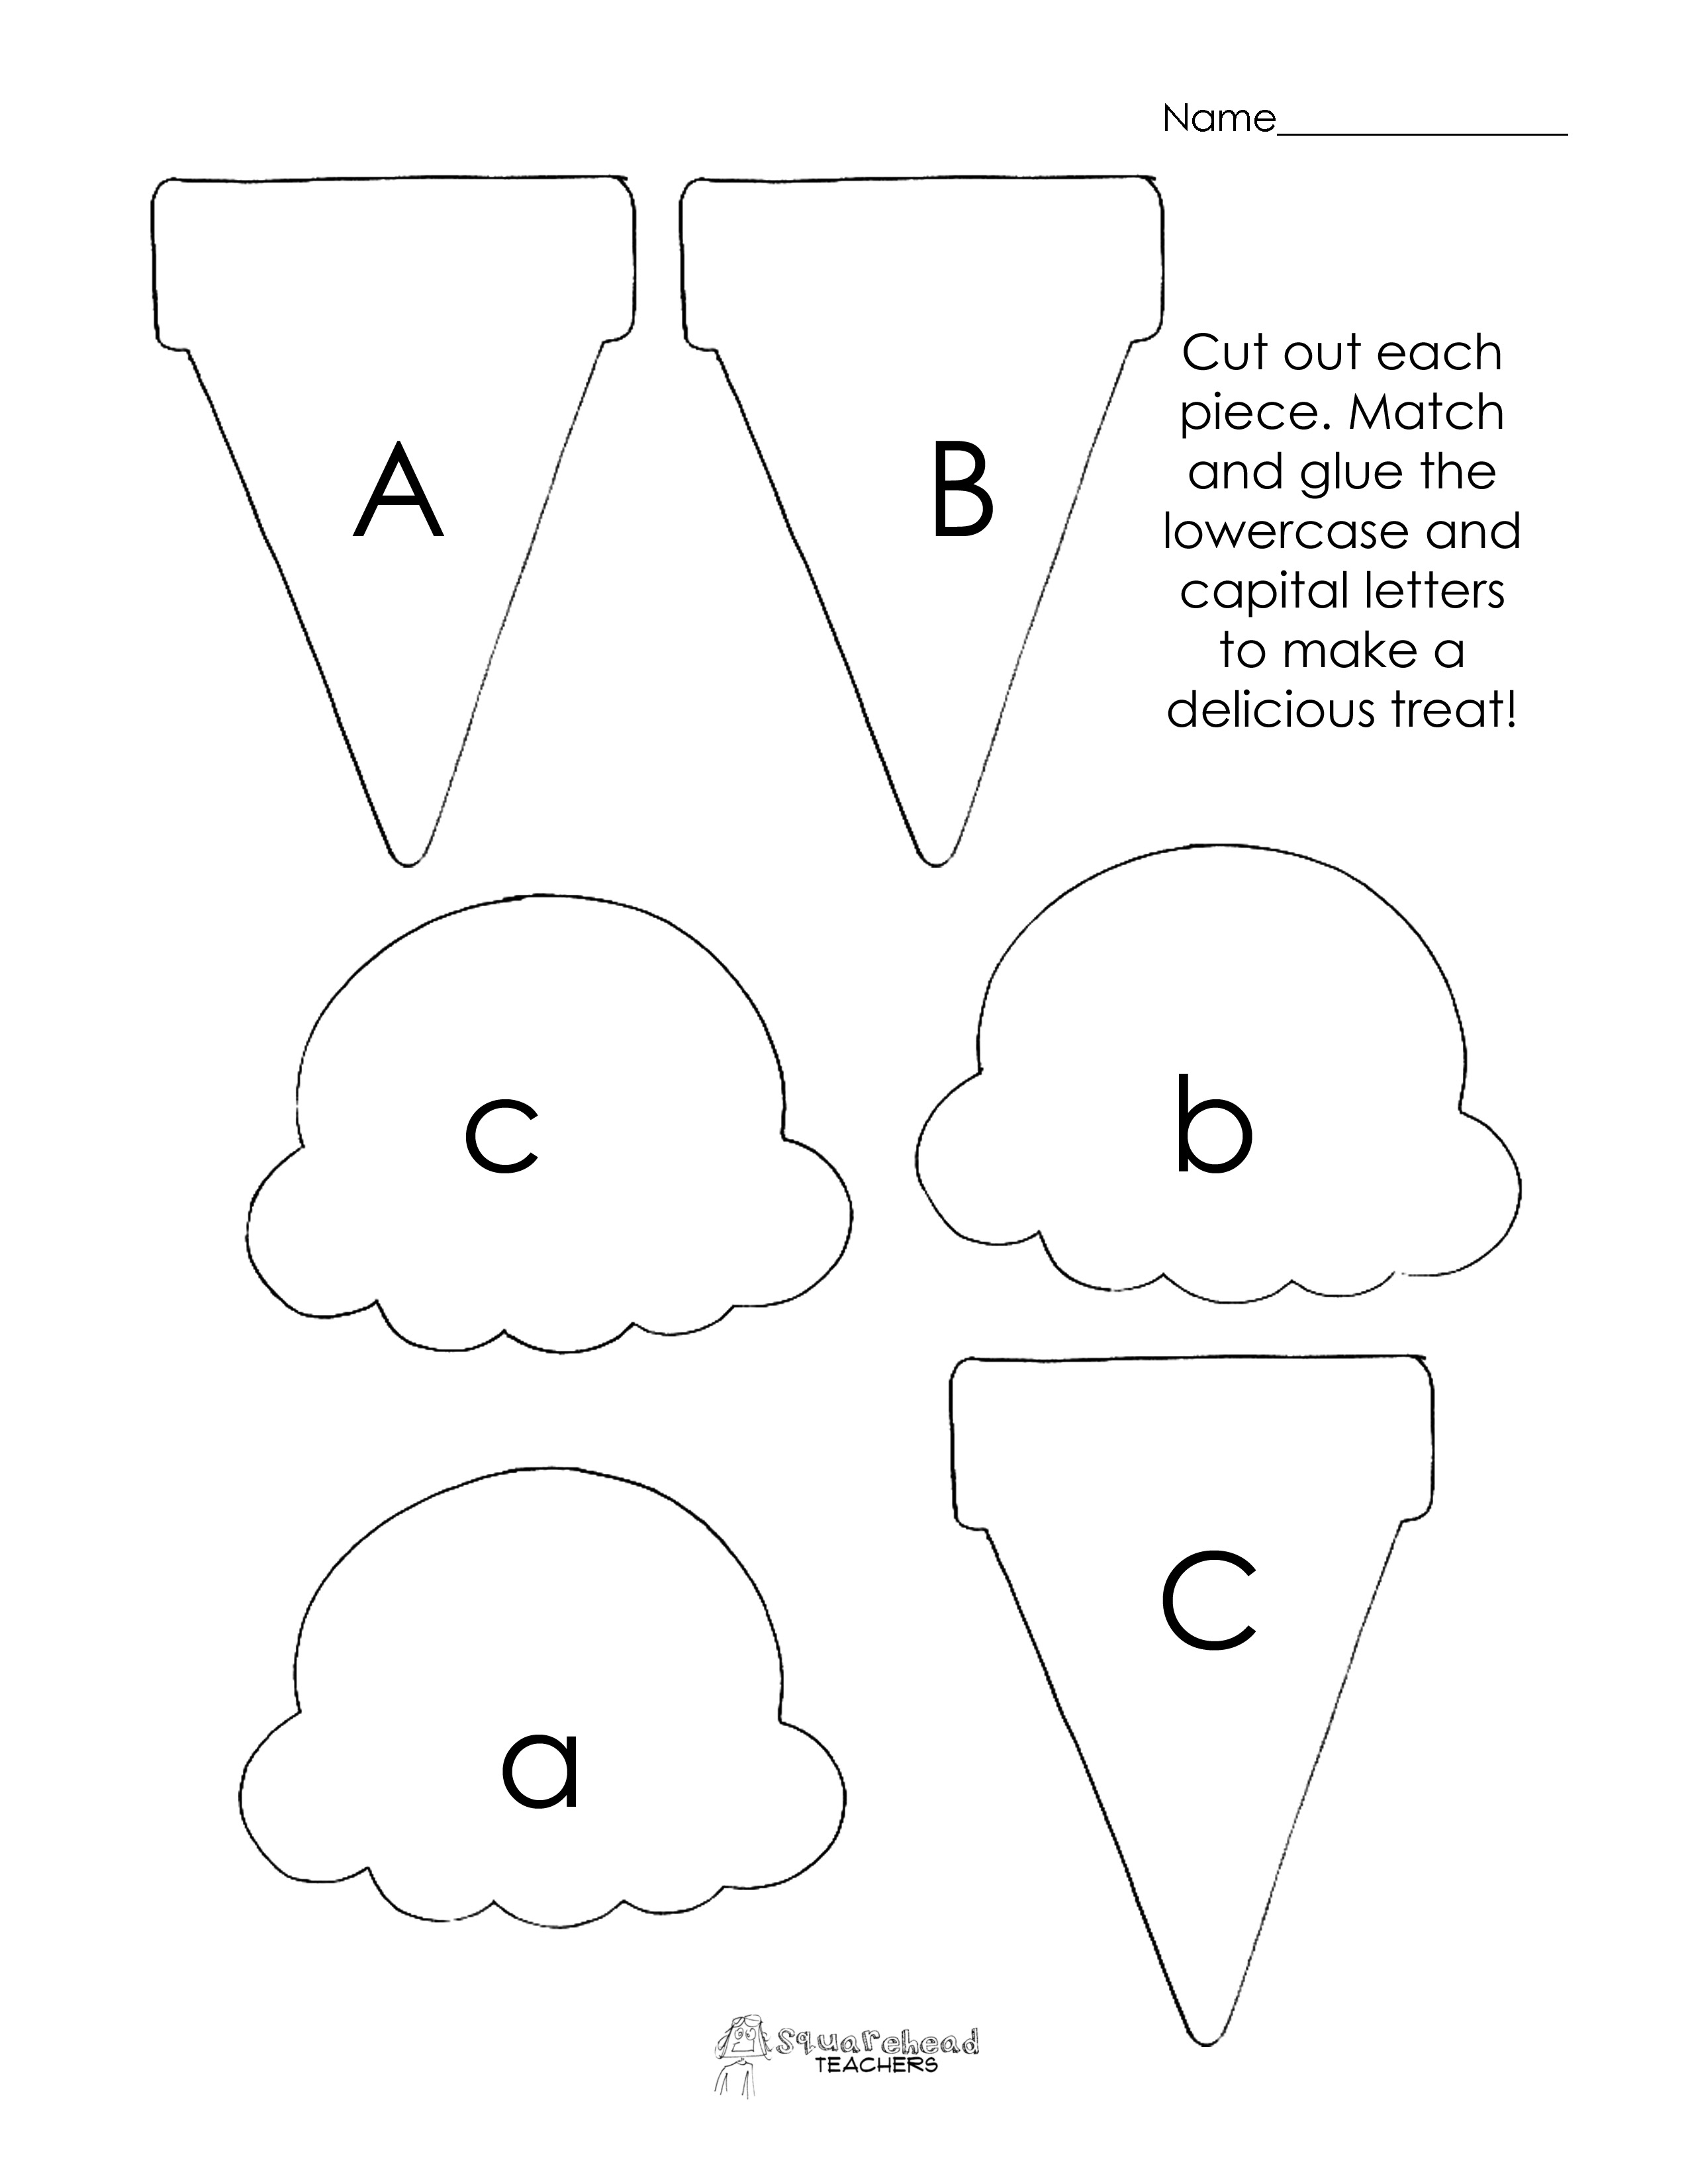 12-best-images-of-abc-upper-and-lowercase-worksheets-practice-writing-lowercase-letters